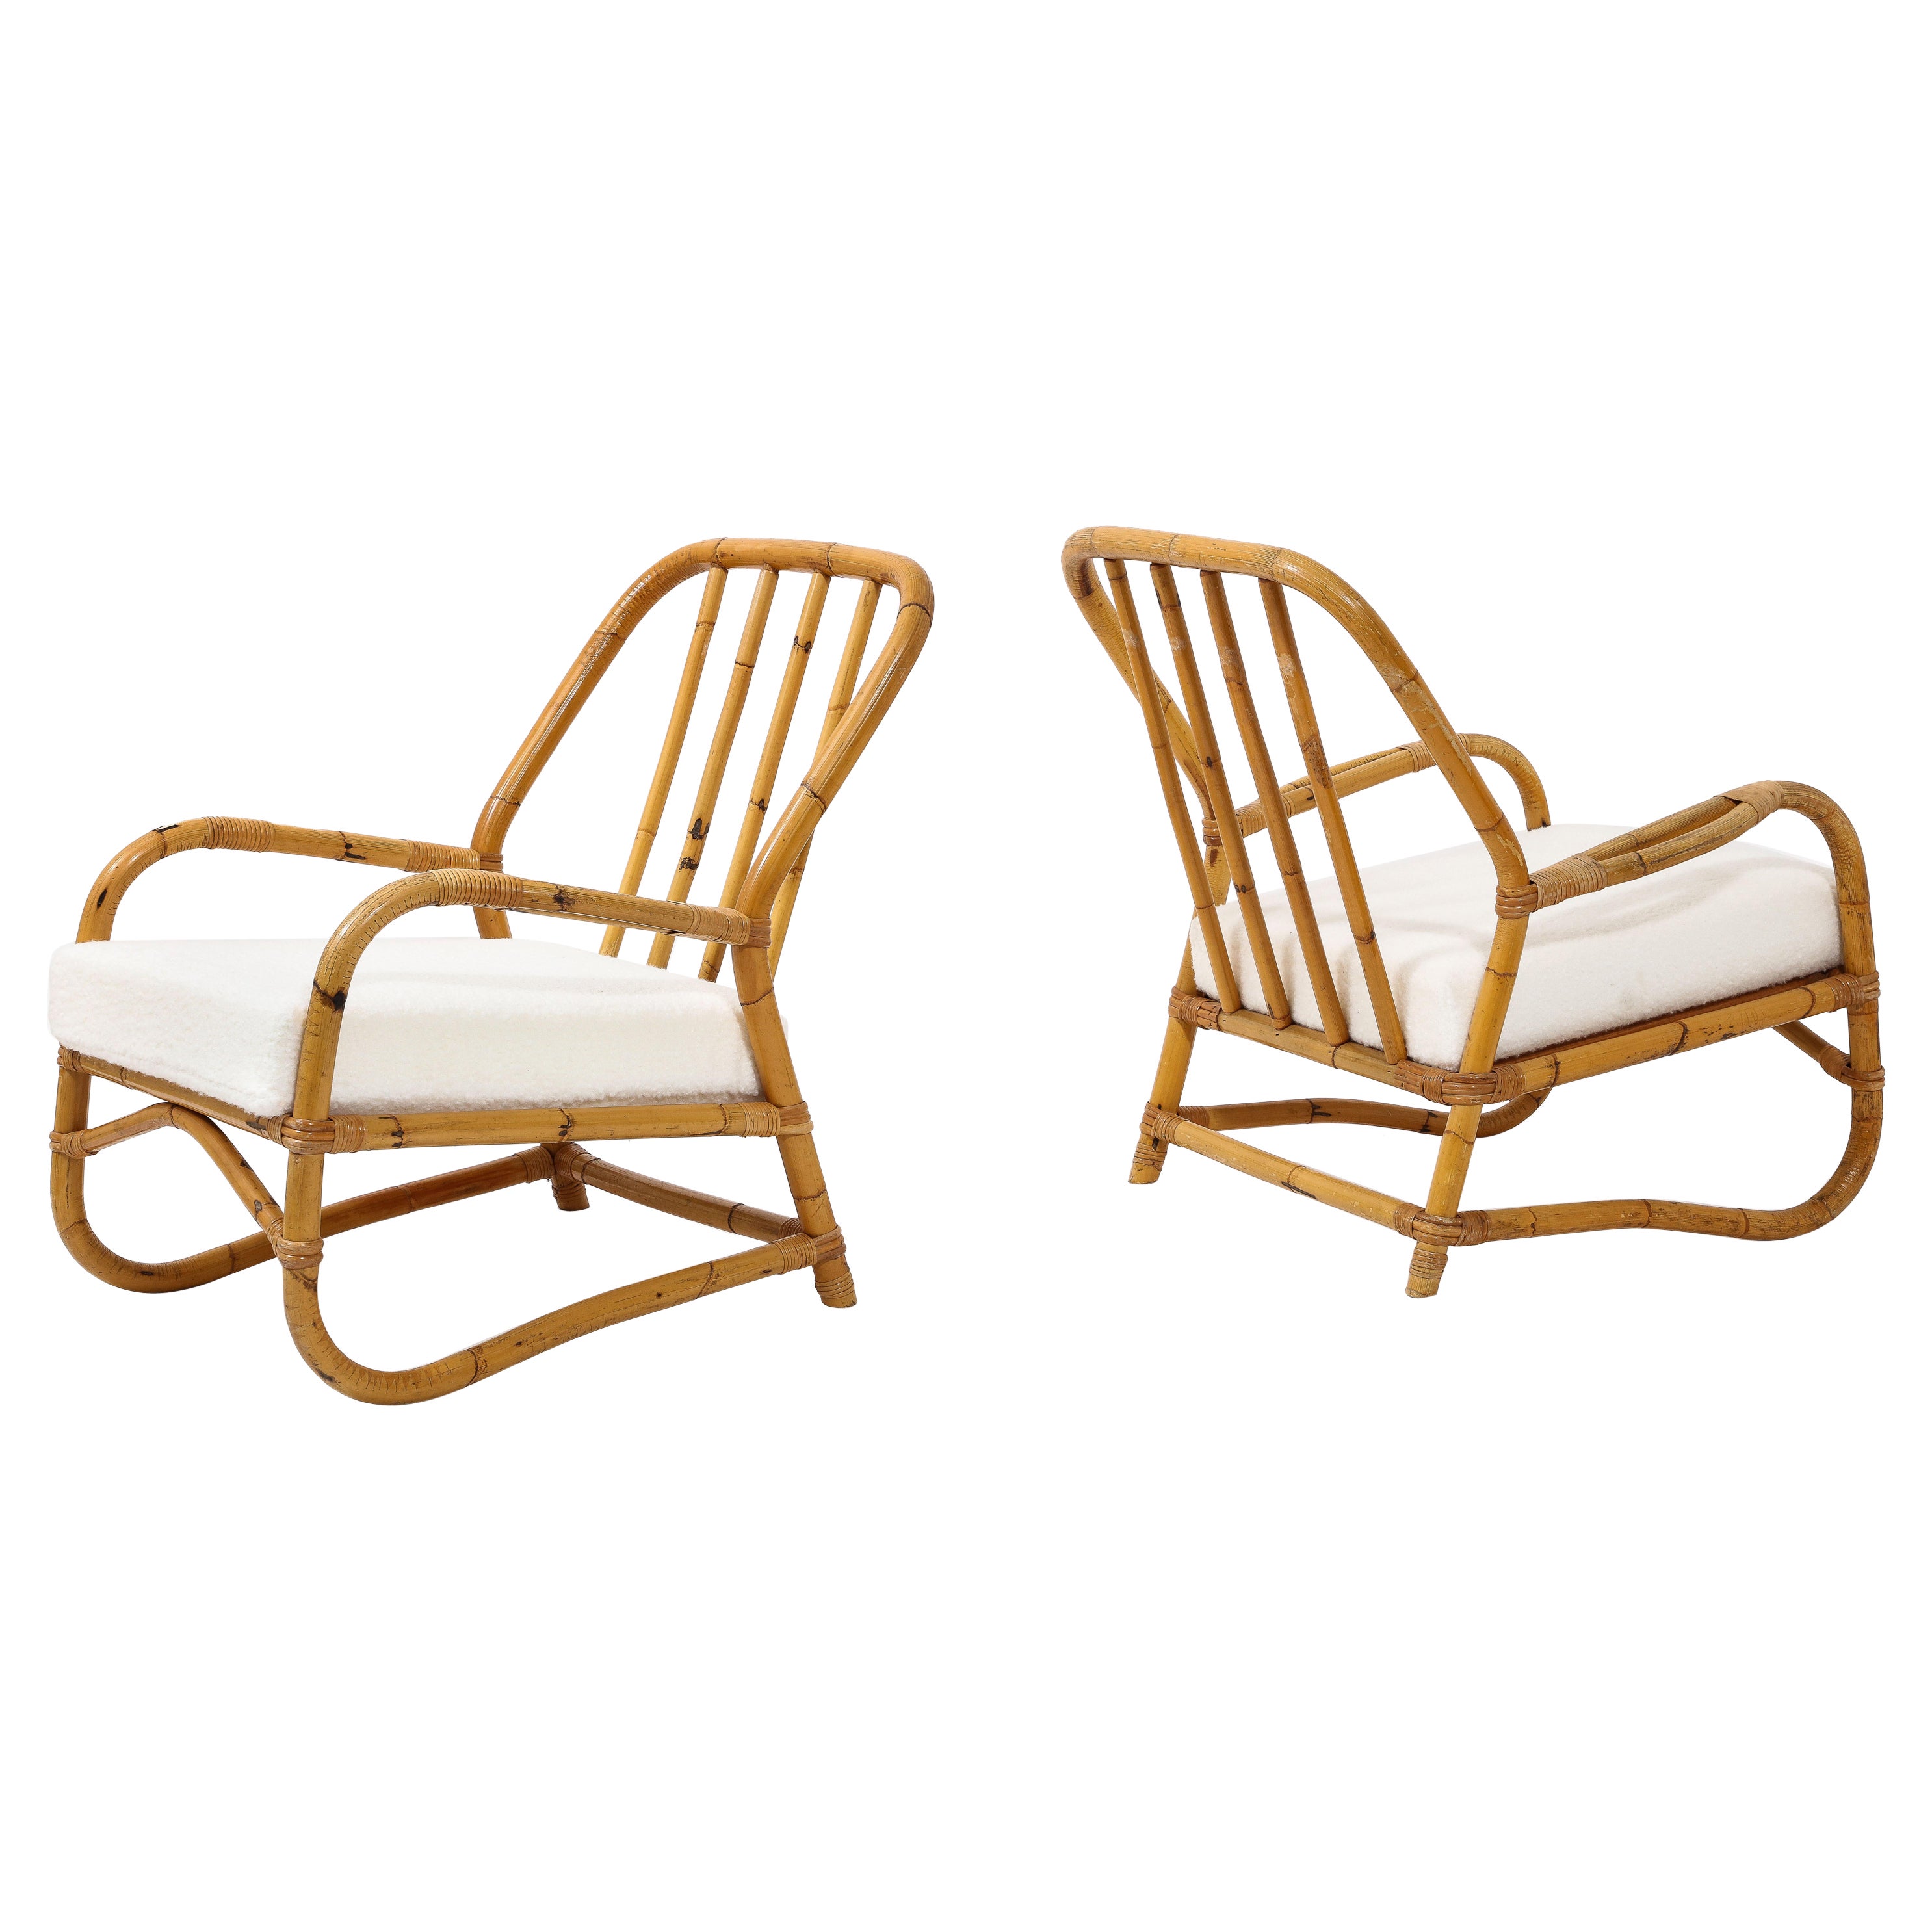 Louis Sognot Style Pair of Curved Bamboo Armchairs, France 1950's For Sale